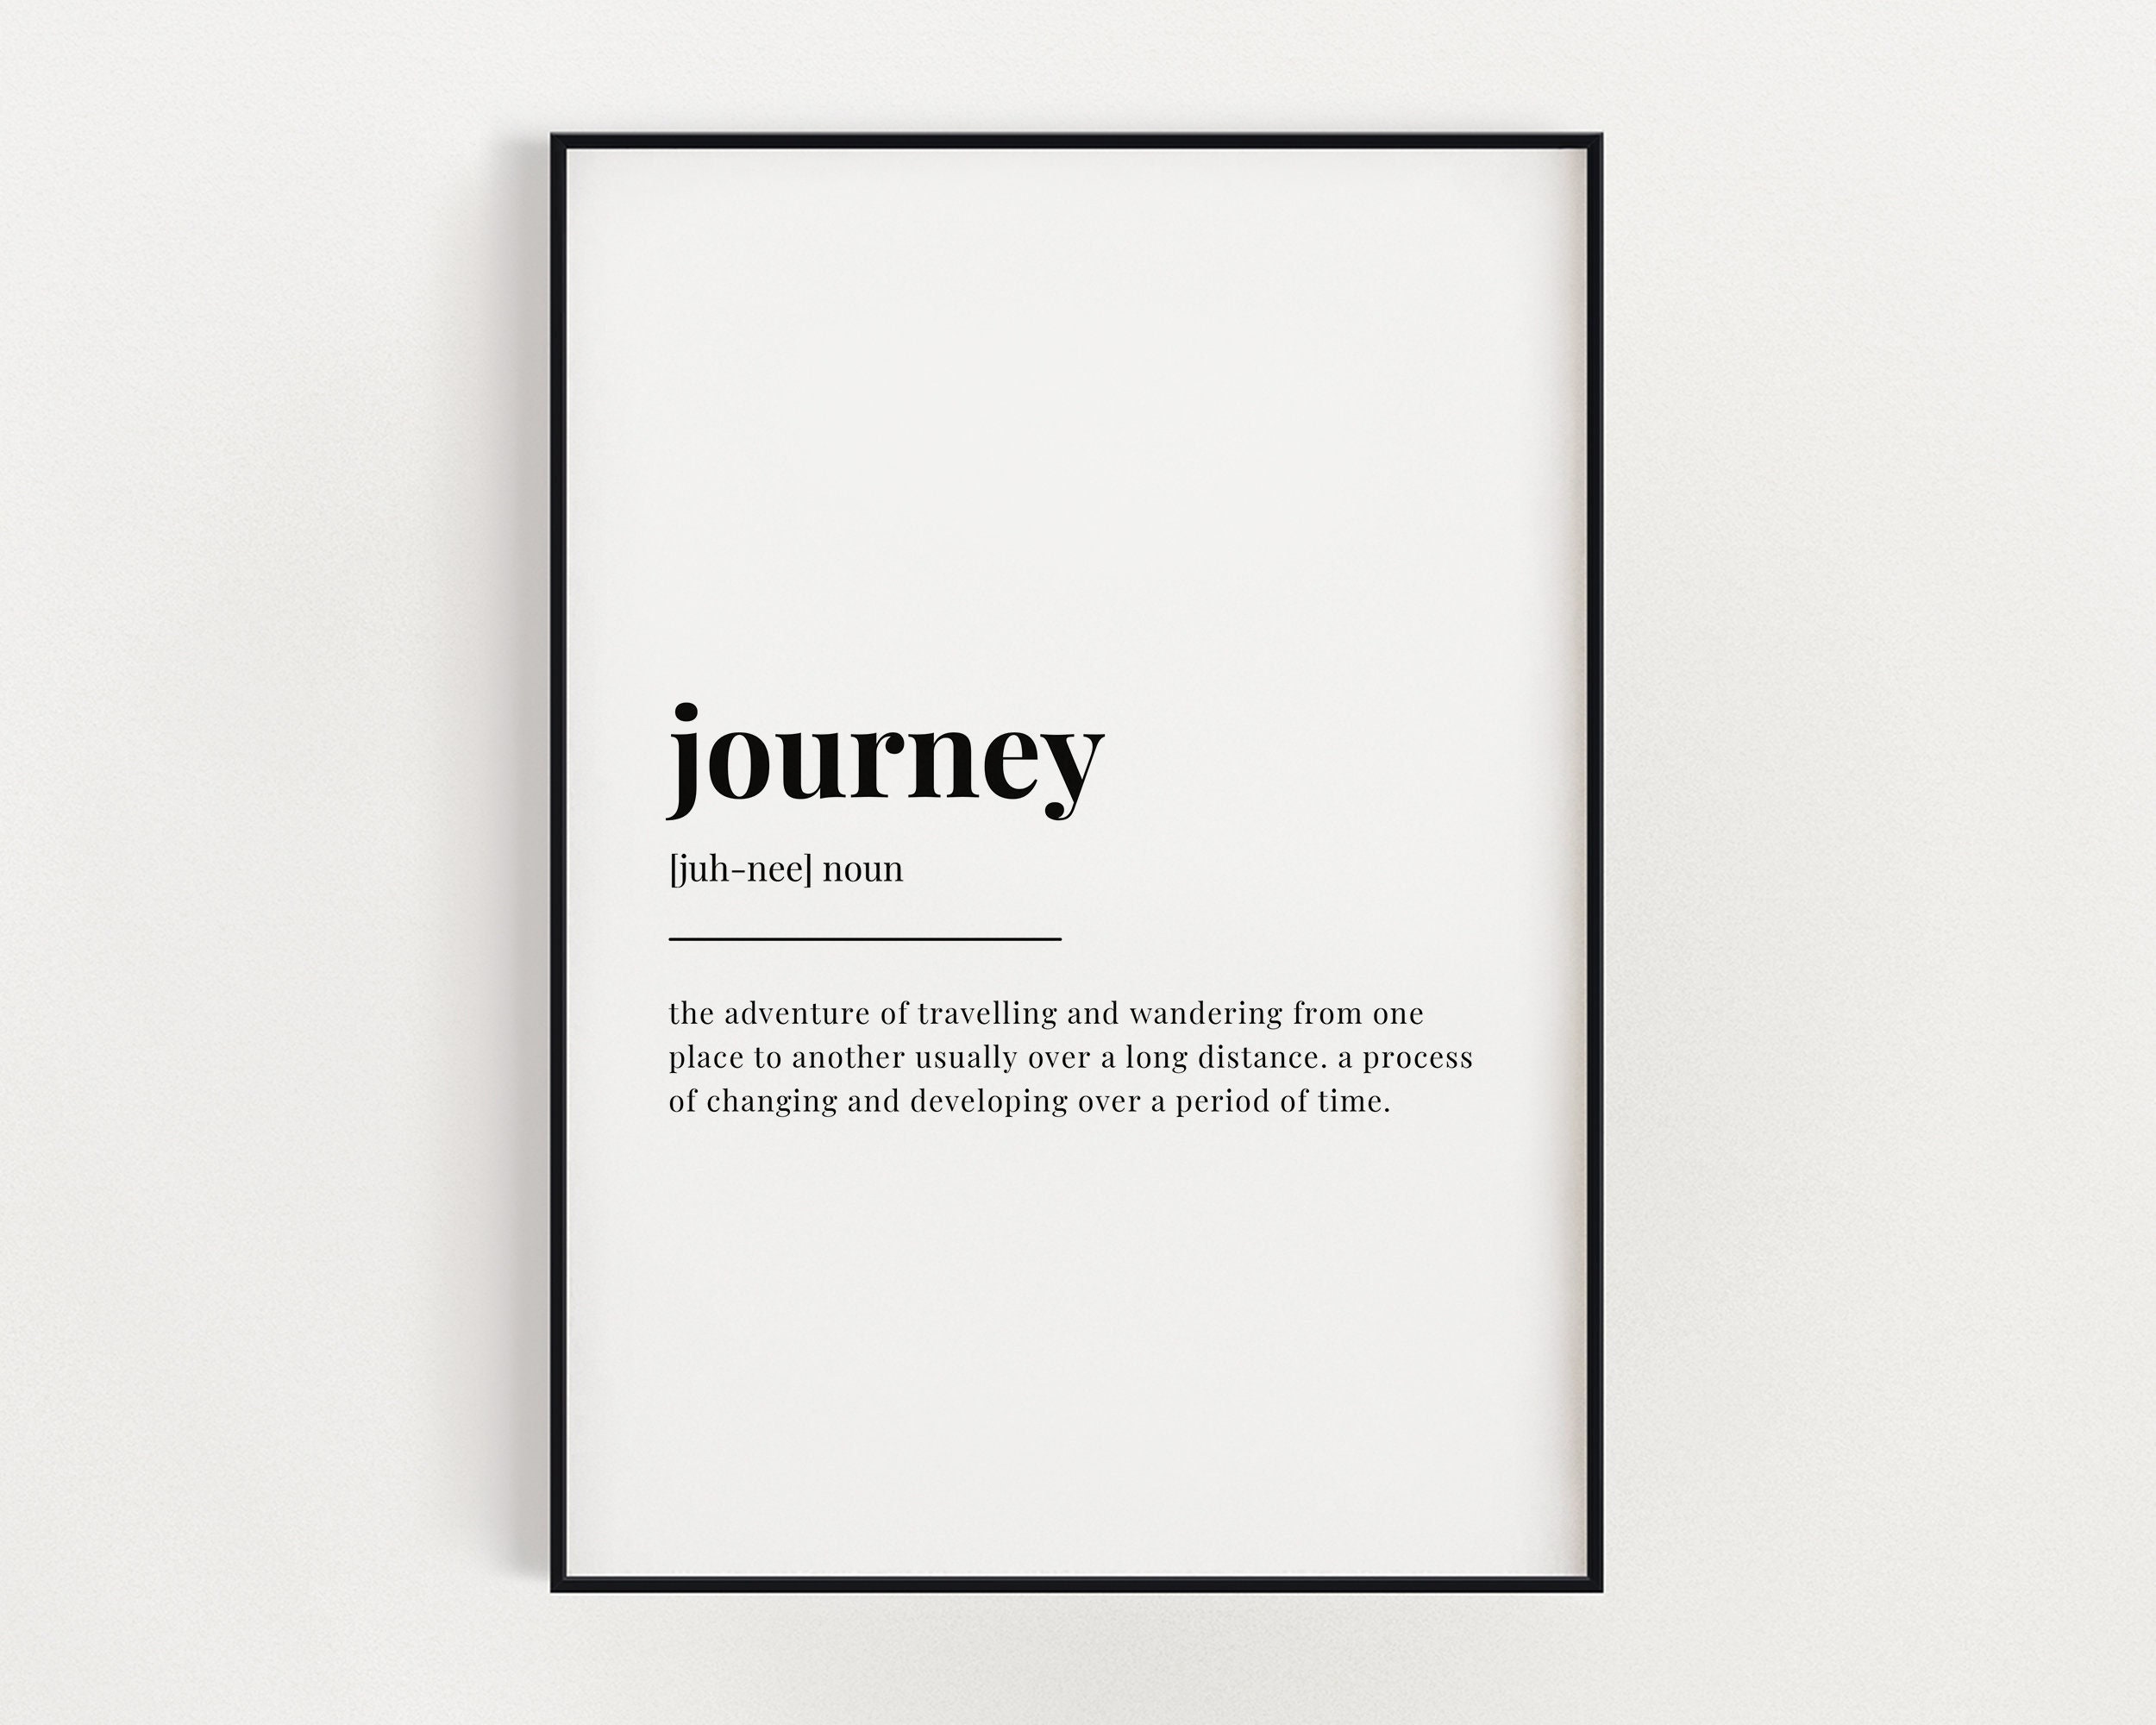 journey by definition